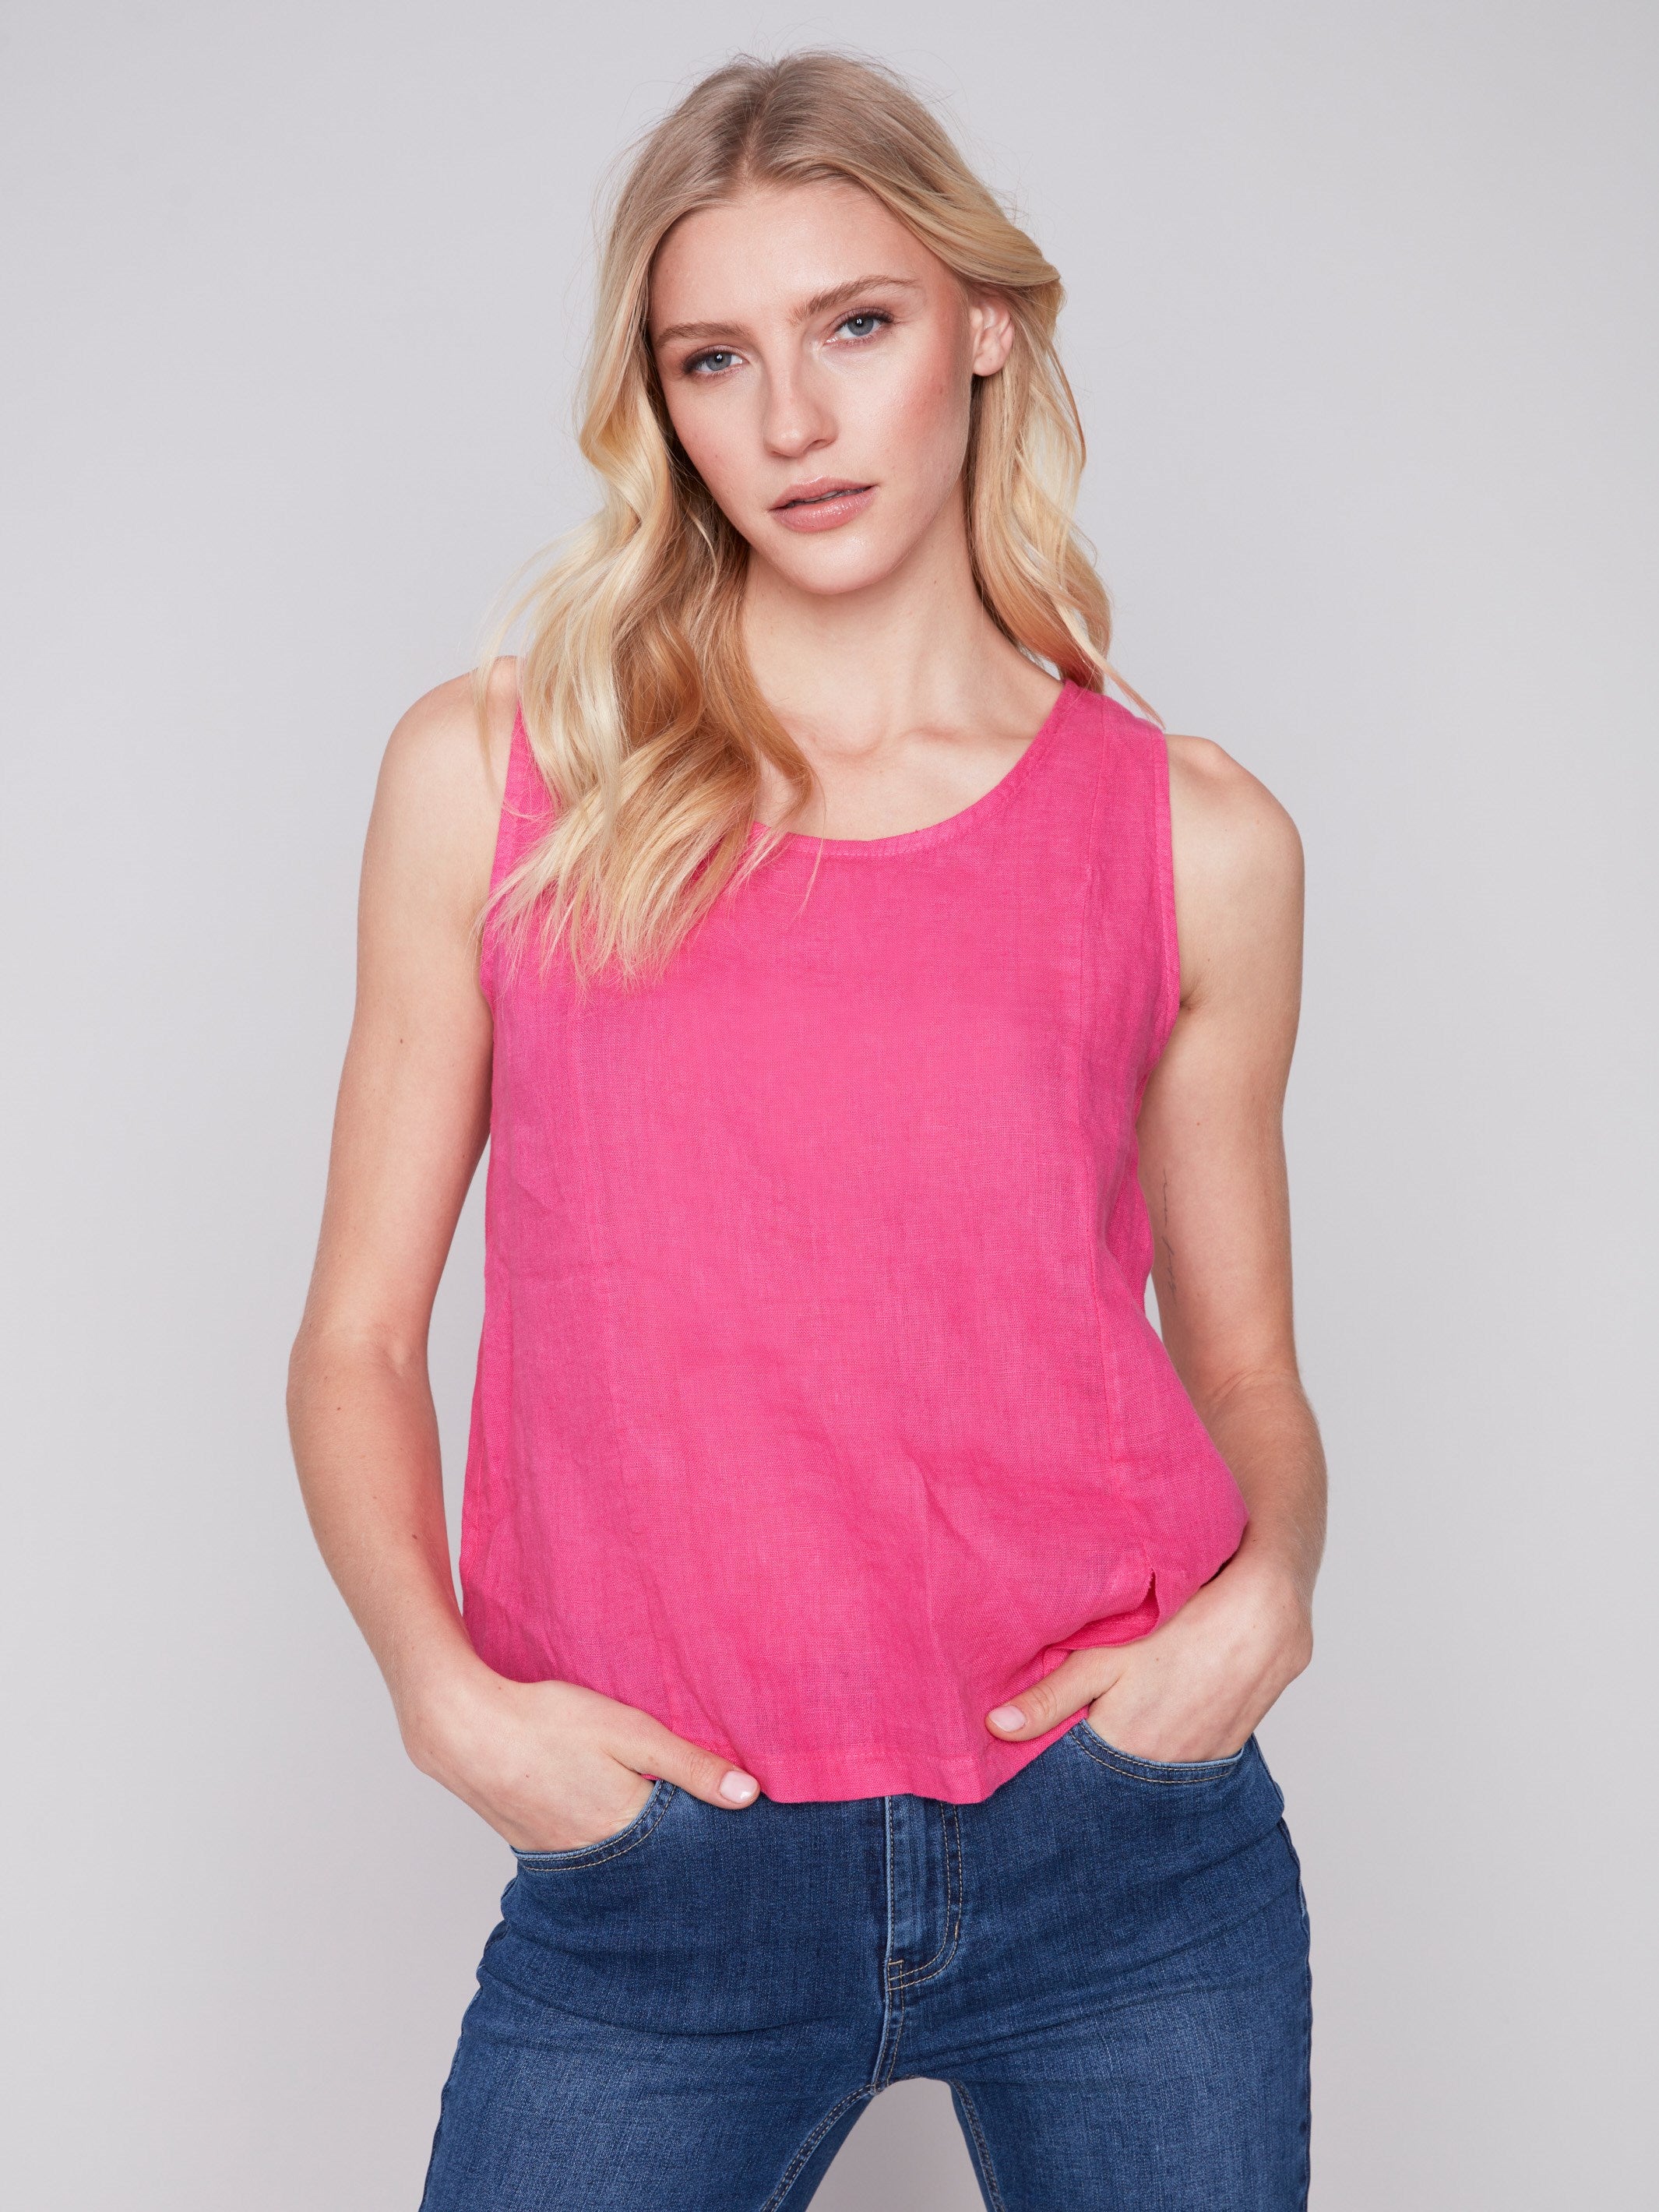 Charlie B Sleeveless Linen Top with Slit - Punch - Image 3